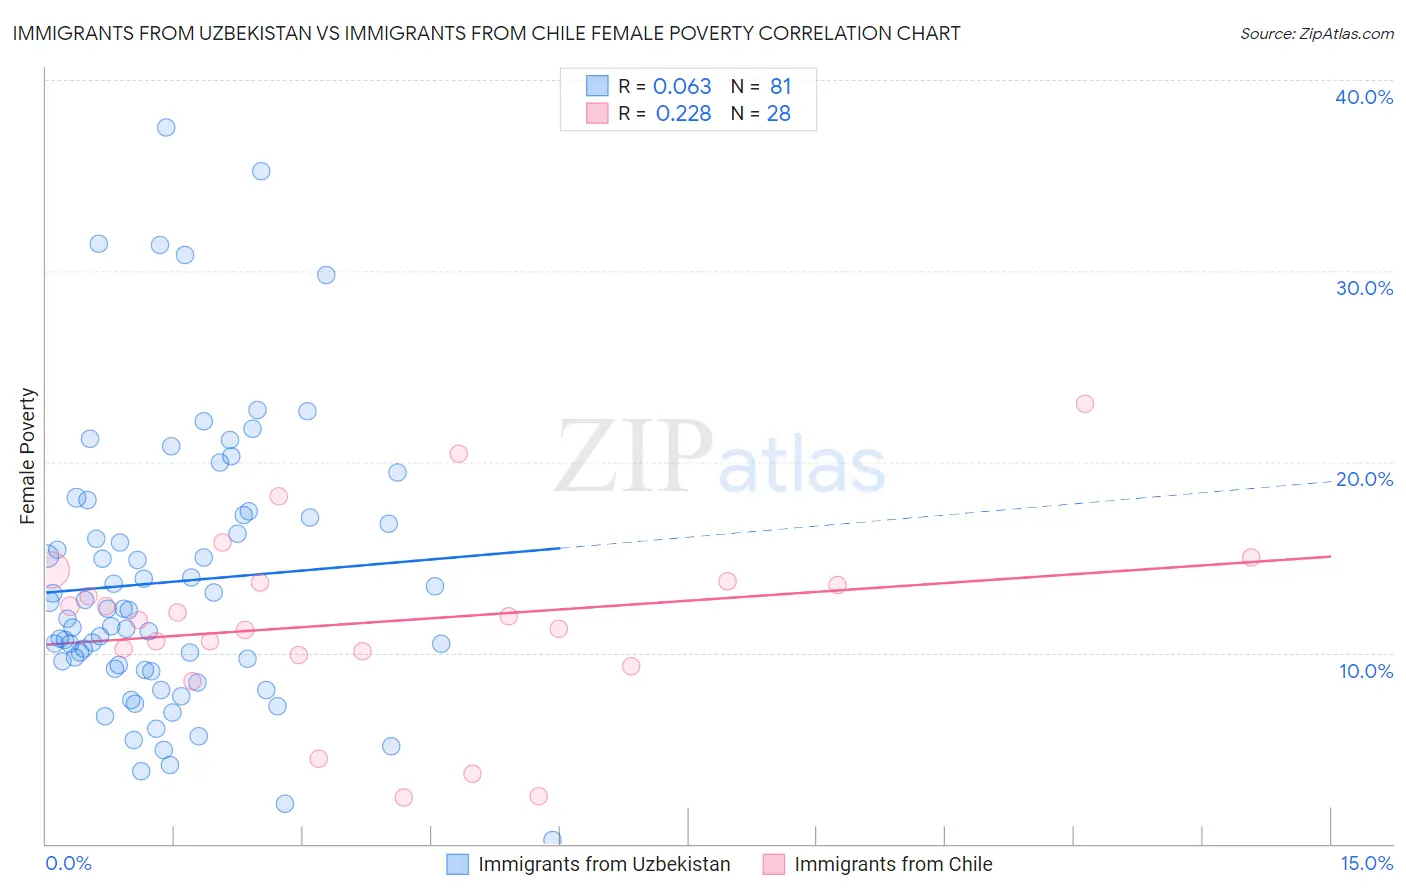 Immigrants from Uzbekistan vs Immigrants from Chile Female Poverty